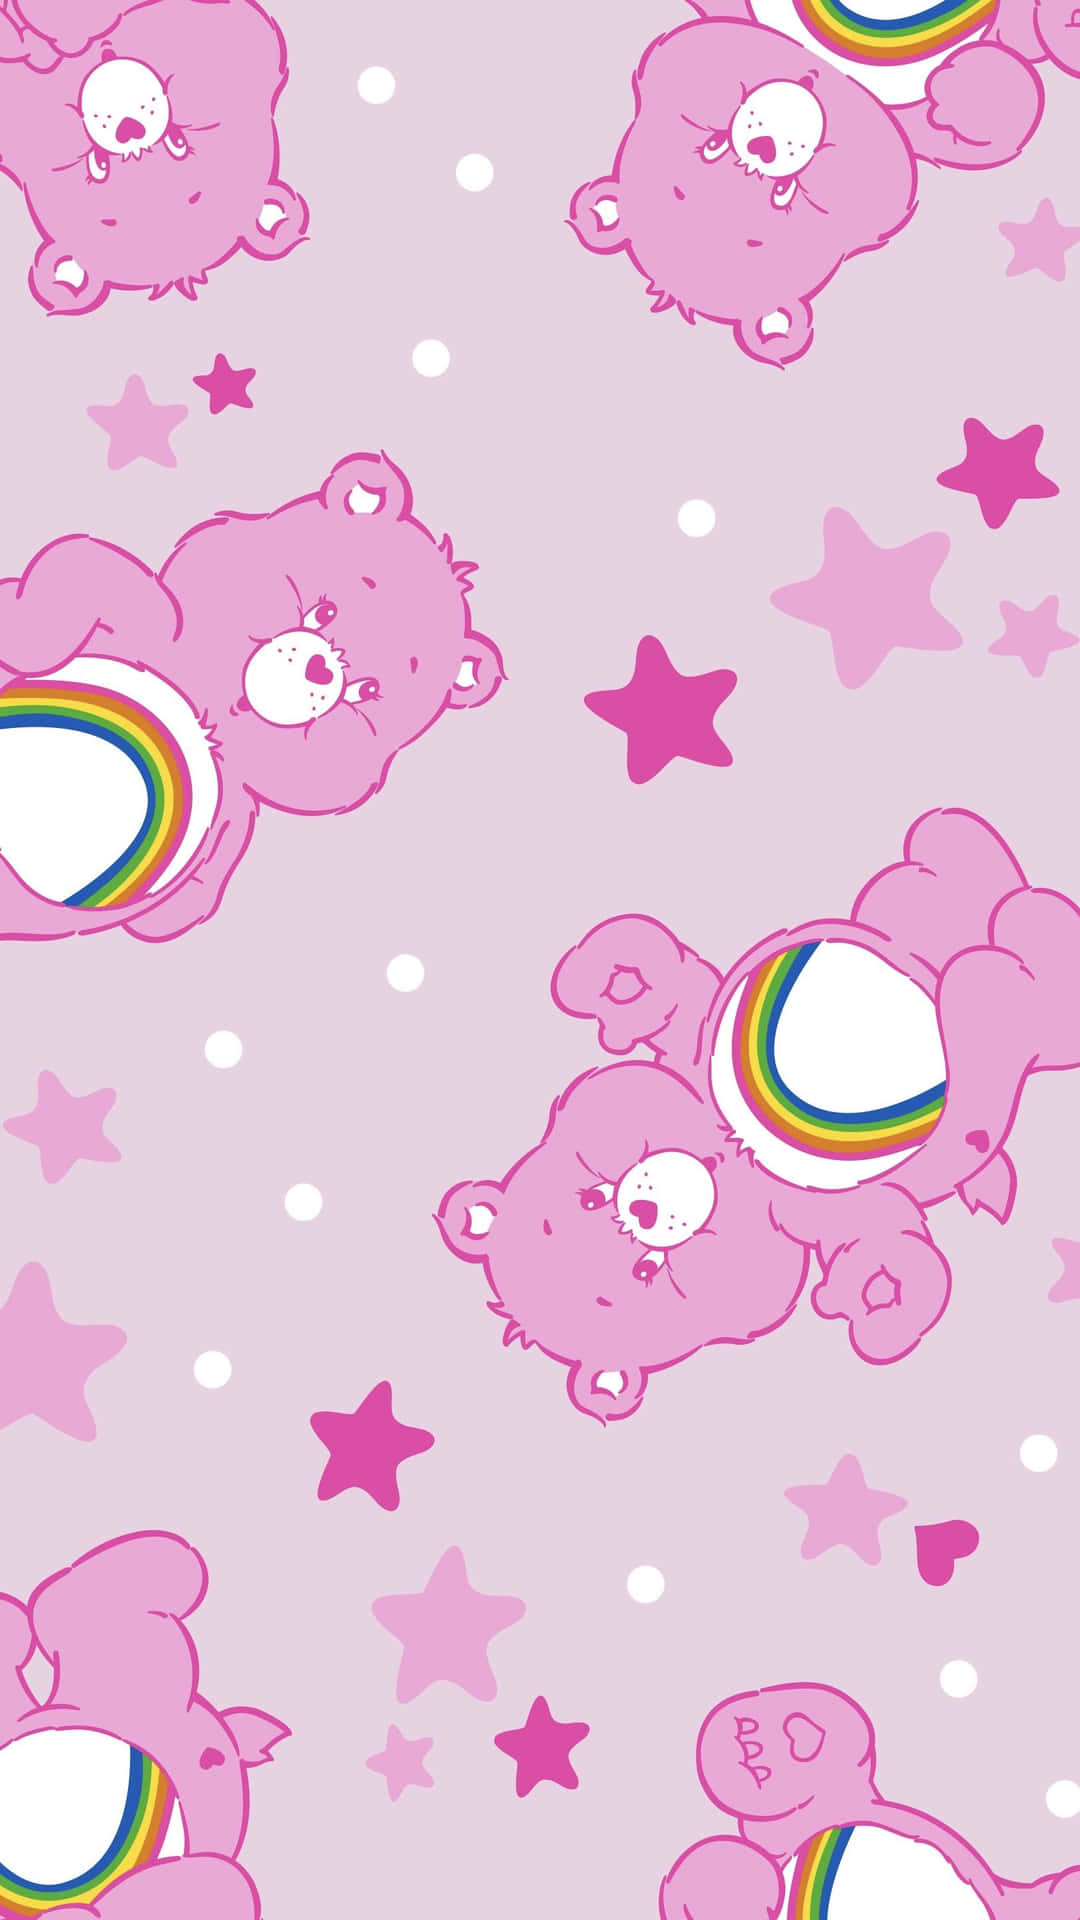 Love-a-lot-bear Kidcore Aesthetic Background